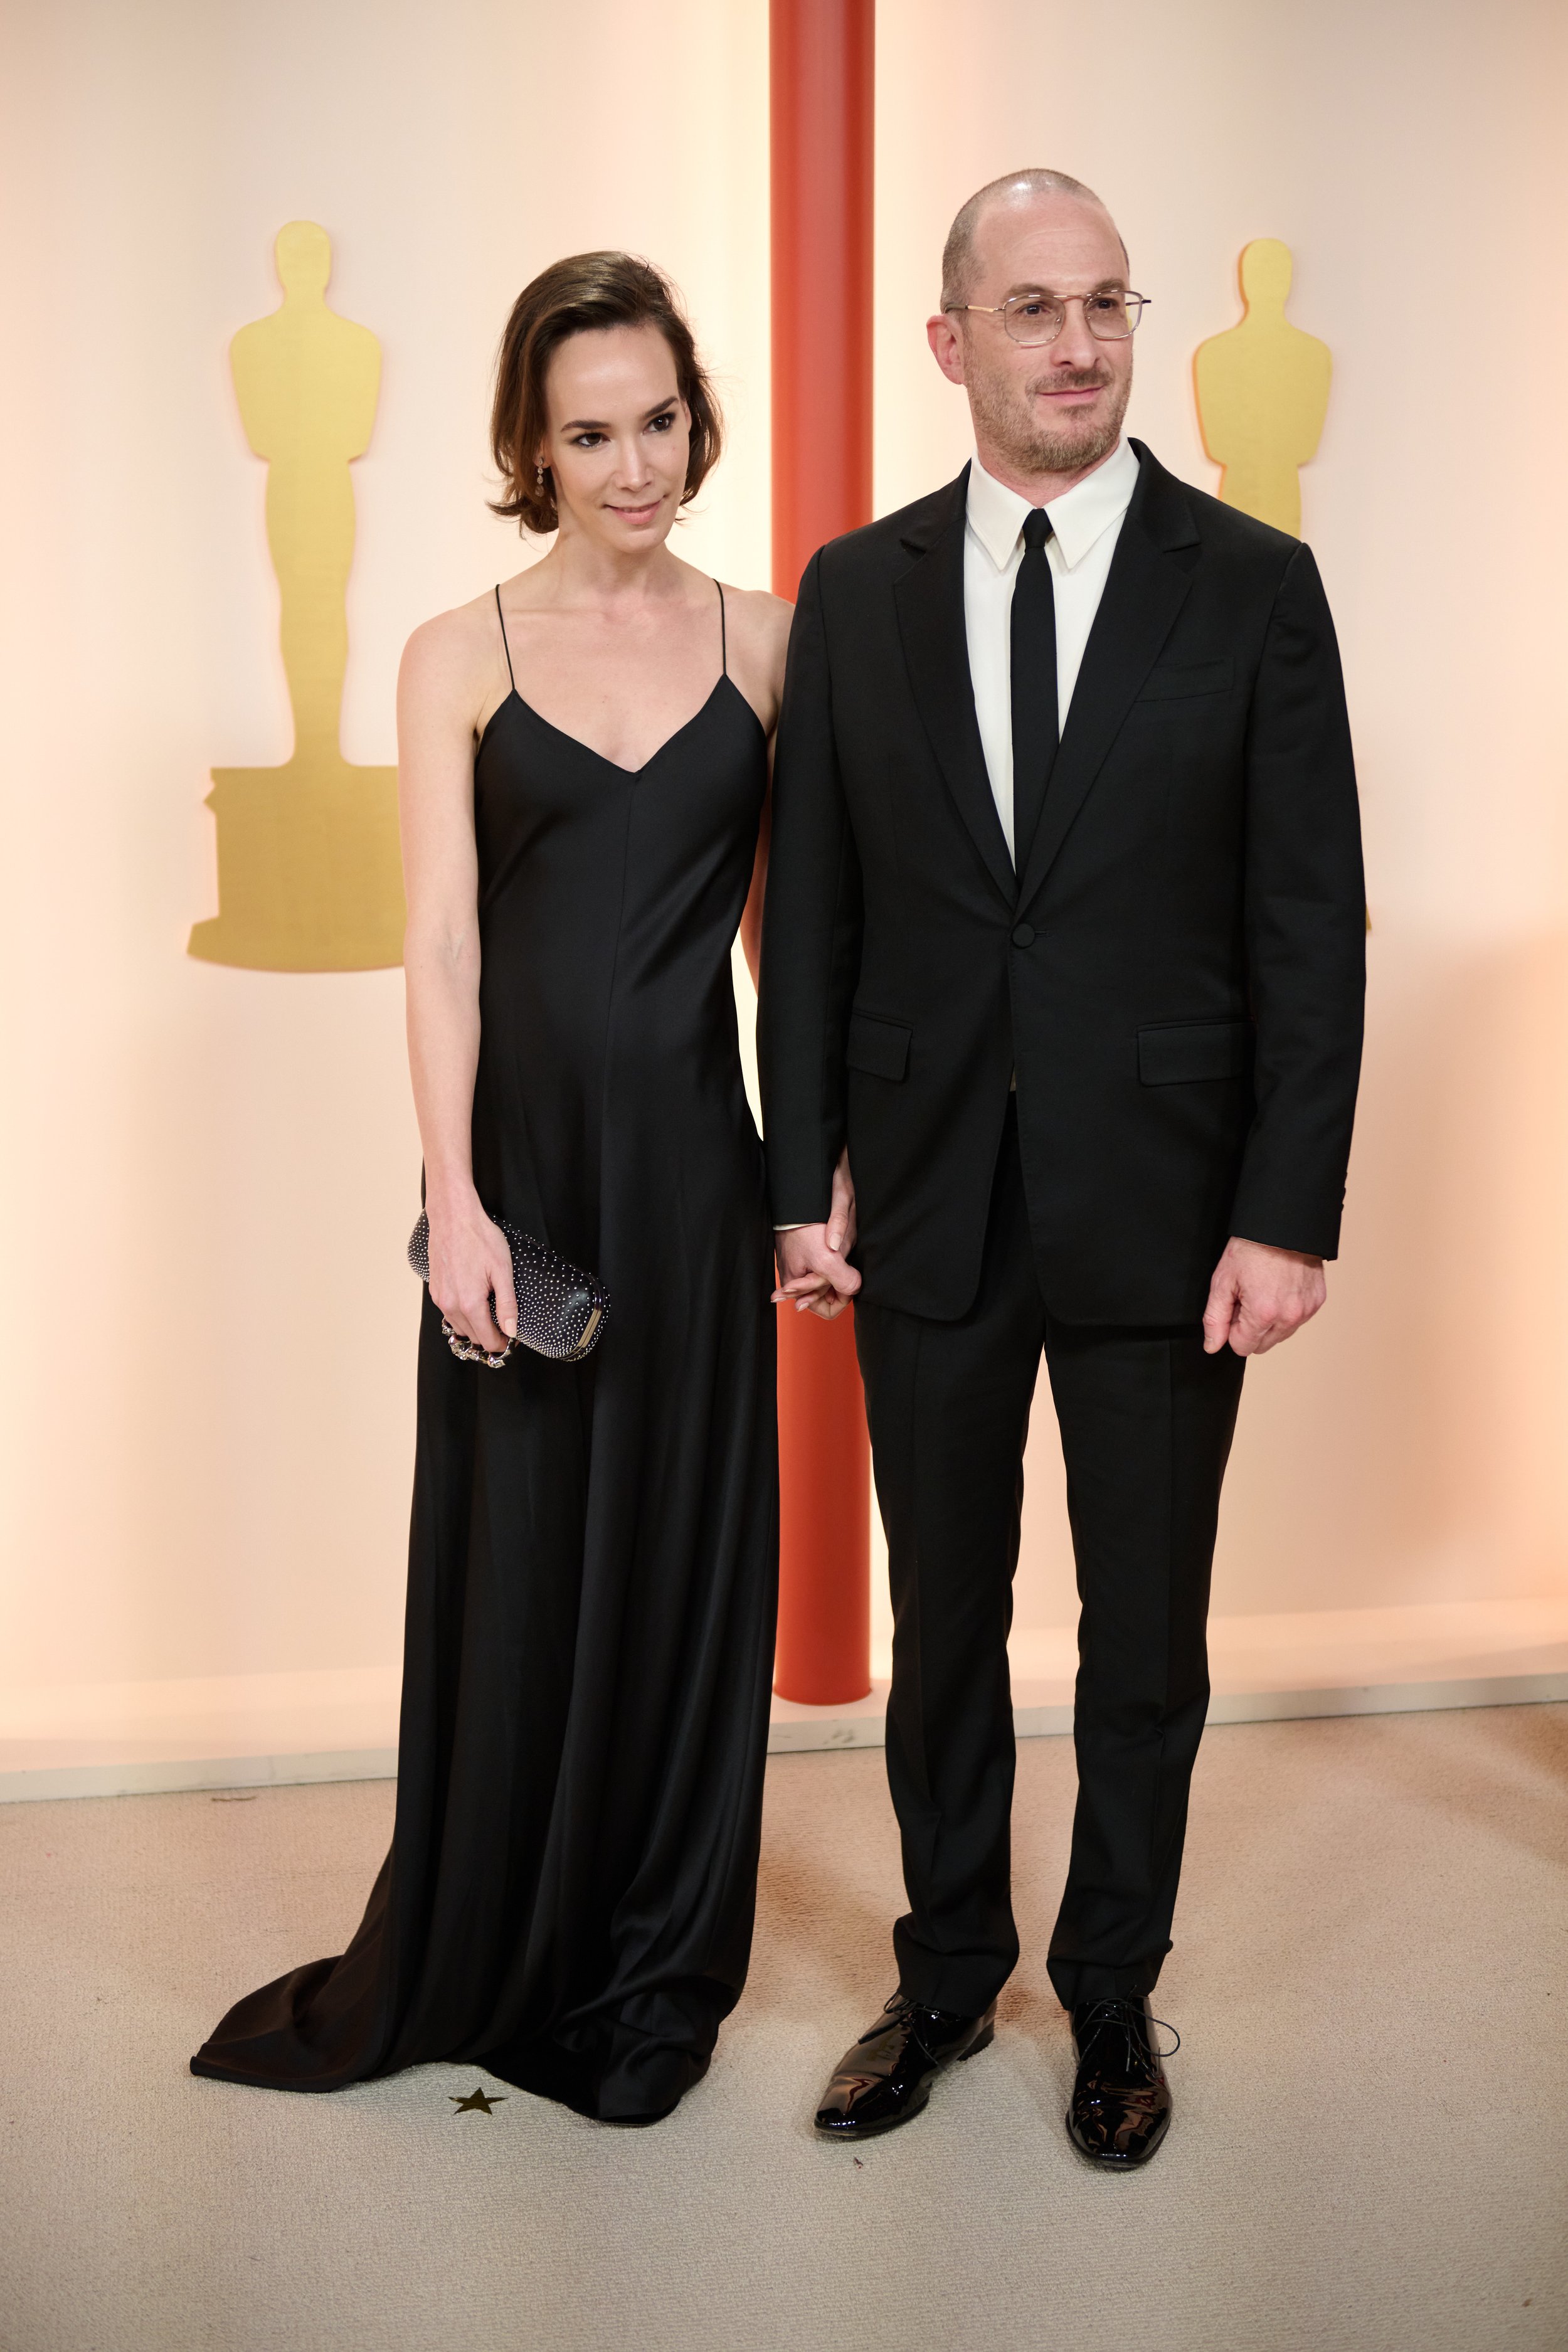 Darren Aronofsky arrives with guest on the red carpet of The 95th Oscars